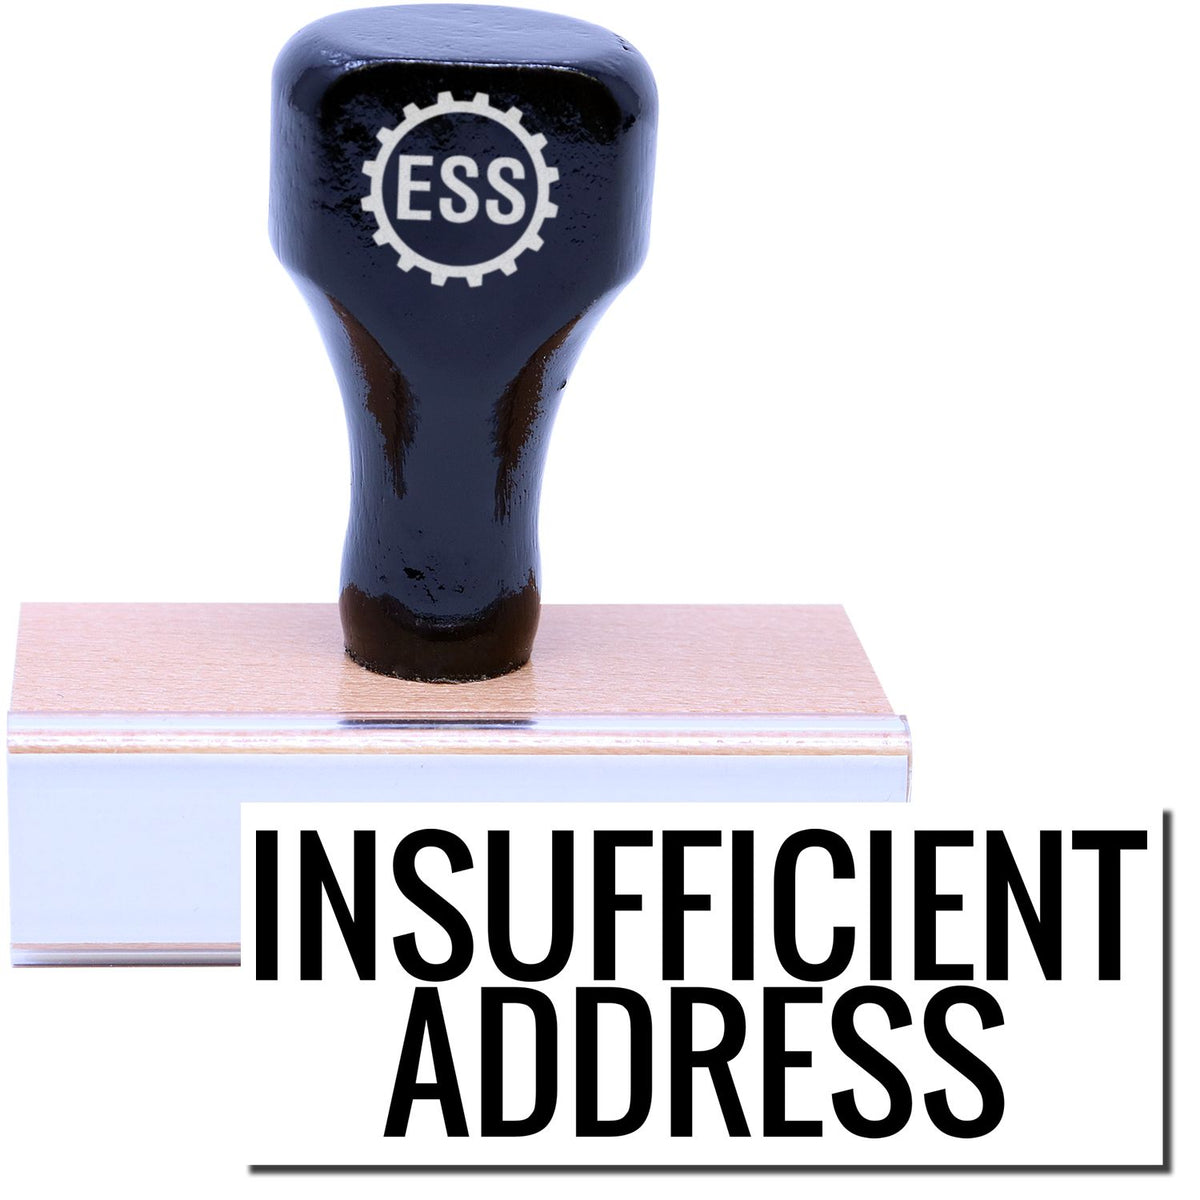 A stock office rubber stamp with a stamped image showing how the text &quot;INSUFFICIENT ADDRESS&quot; is displayed after stamping.